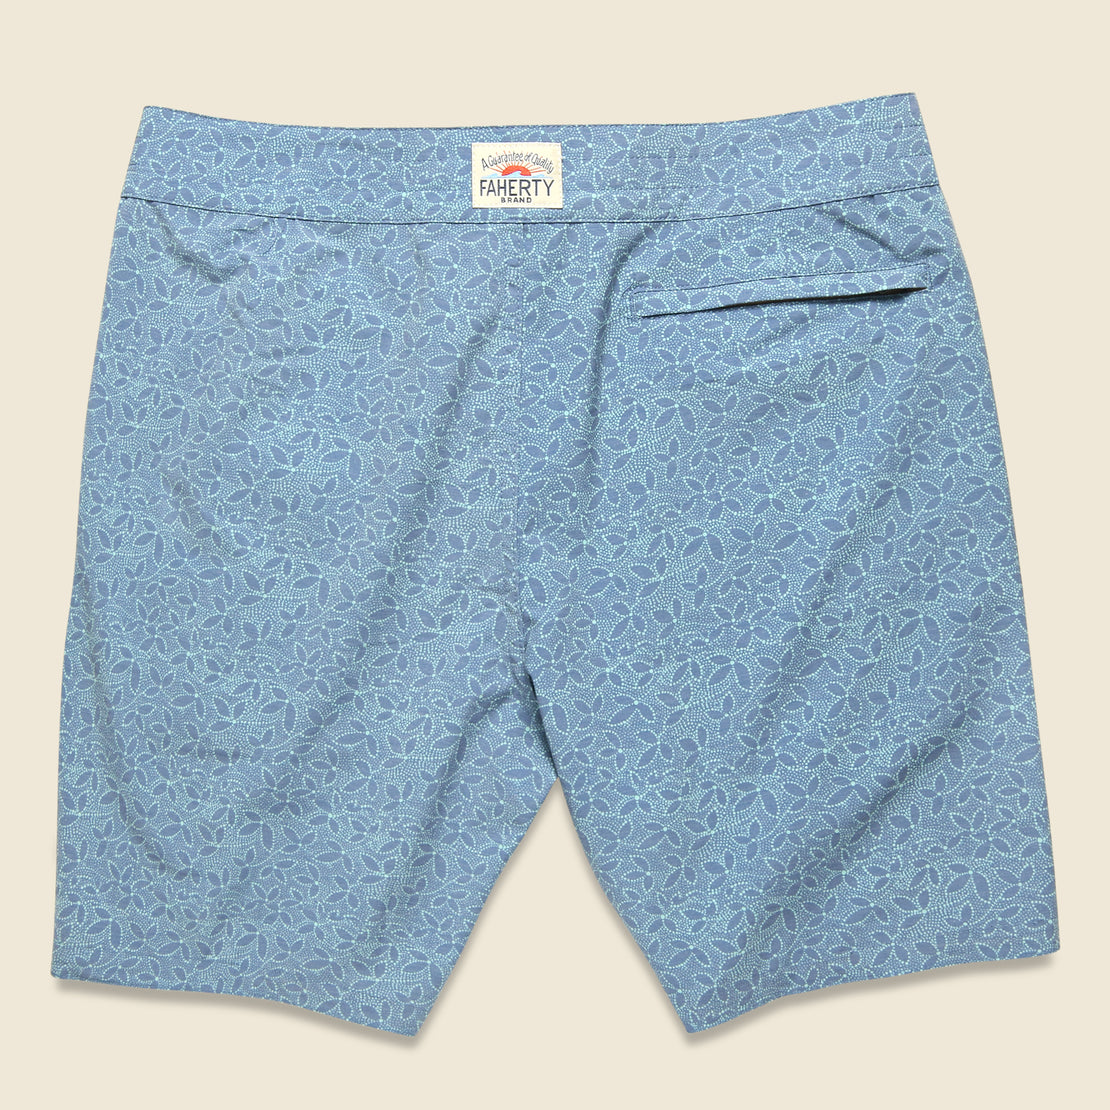 Classic 7" Boardshort - Teal Ivy - Faherty - STAG Provisions - Shorts - Swim